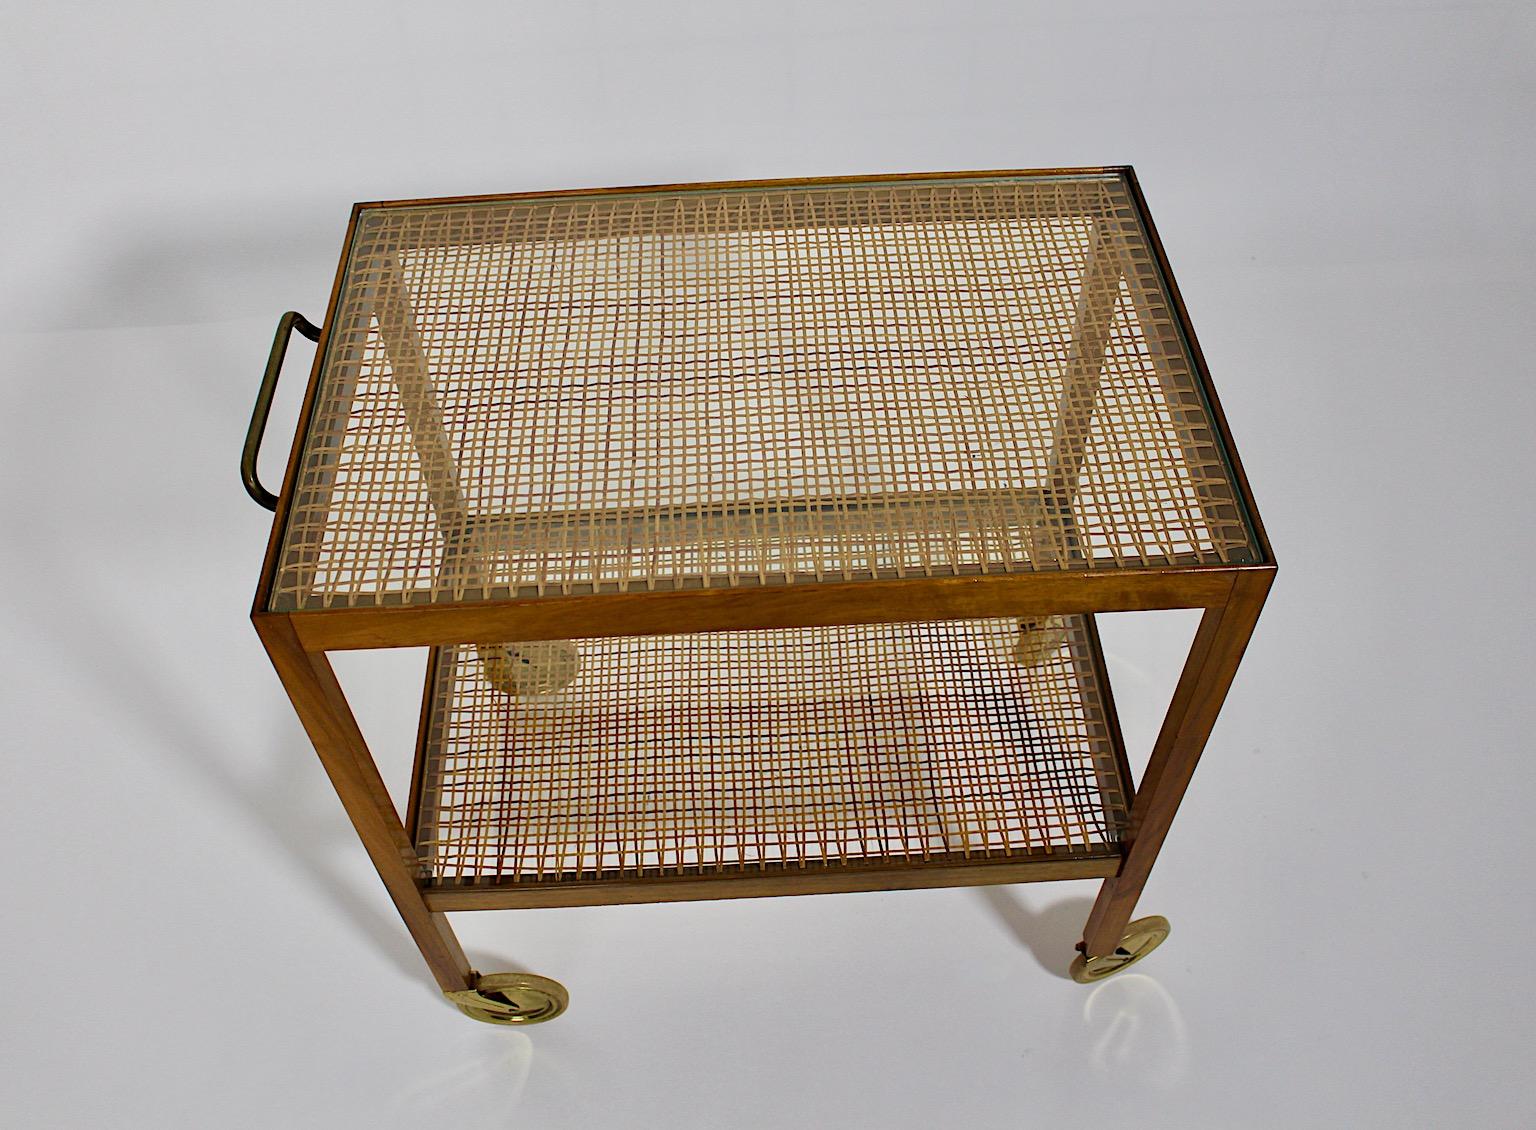 Art Deco vintage bar cart or serving table from walnut and brass, the design is attributed to Julius Jirasek for Werkstätte Hagenauer circa 1935 Vienna.
A fabulous organic bar cart or serving table from walnut in stunning warm color tone with brass